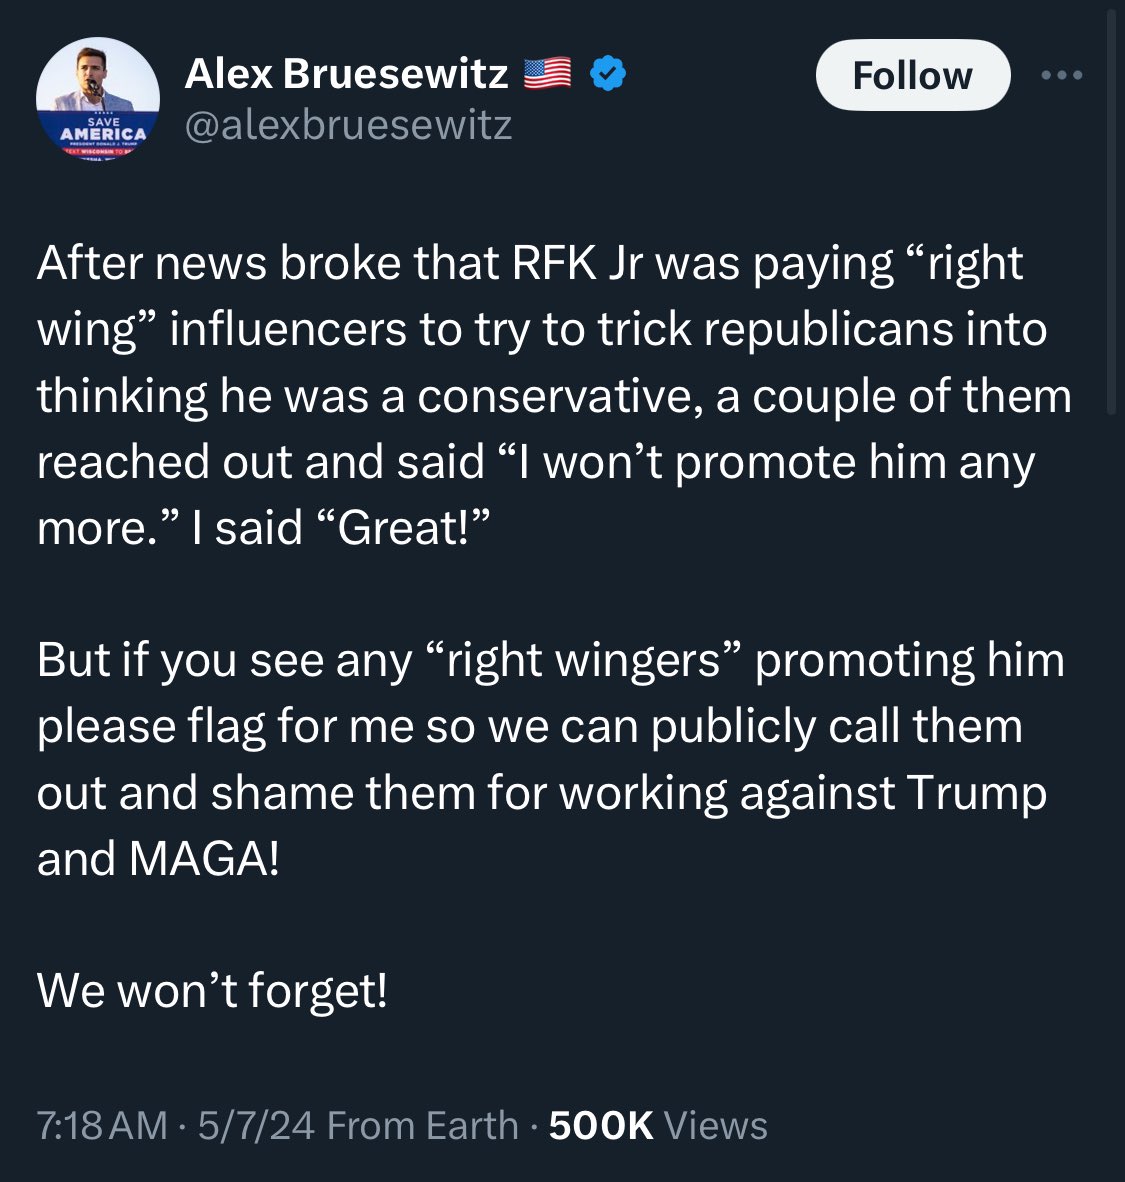 You better hope Trump wins in November, @alexbruesewitz, or I’m going to drag you from one side of Twitter to the other…. We won’t forget, either, and we will make sure your career as a cultist “political consultant” is over.